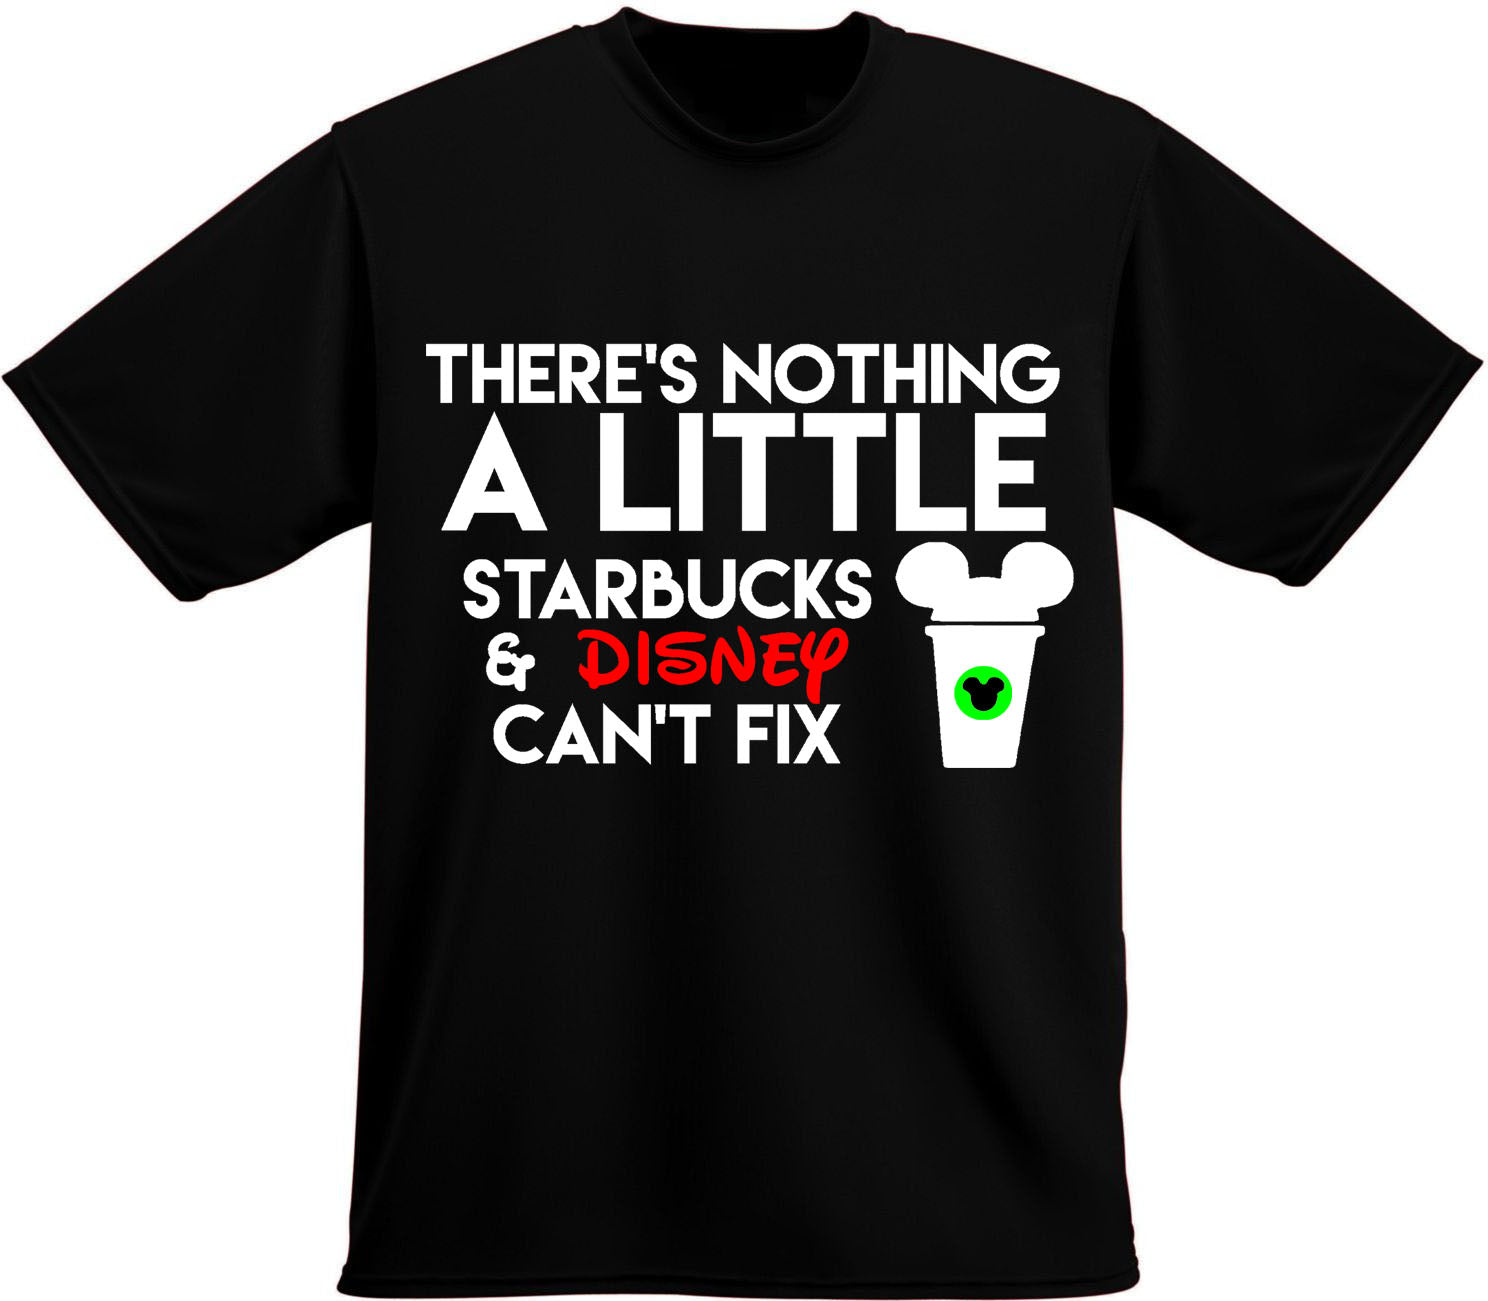 There is nothing a little...  T-shirt